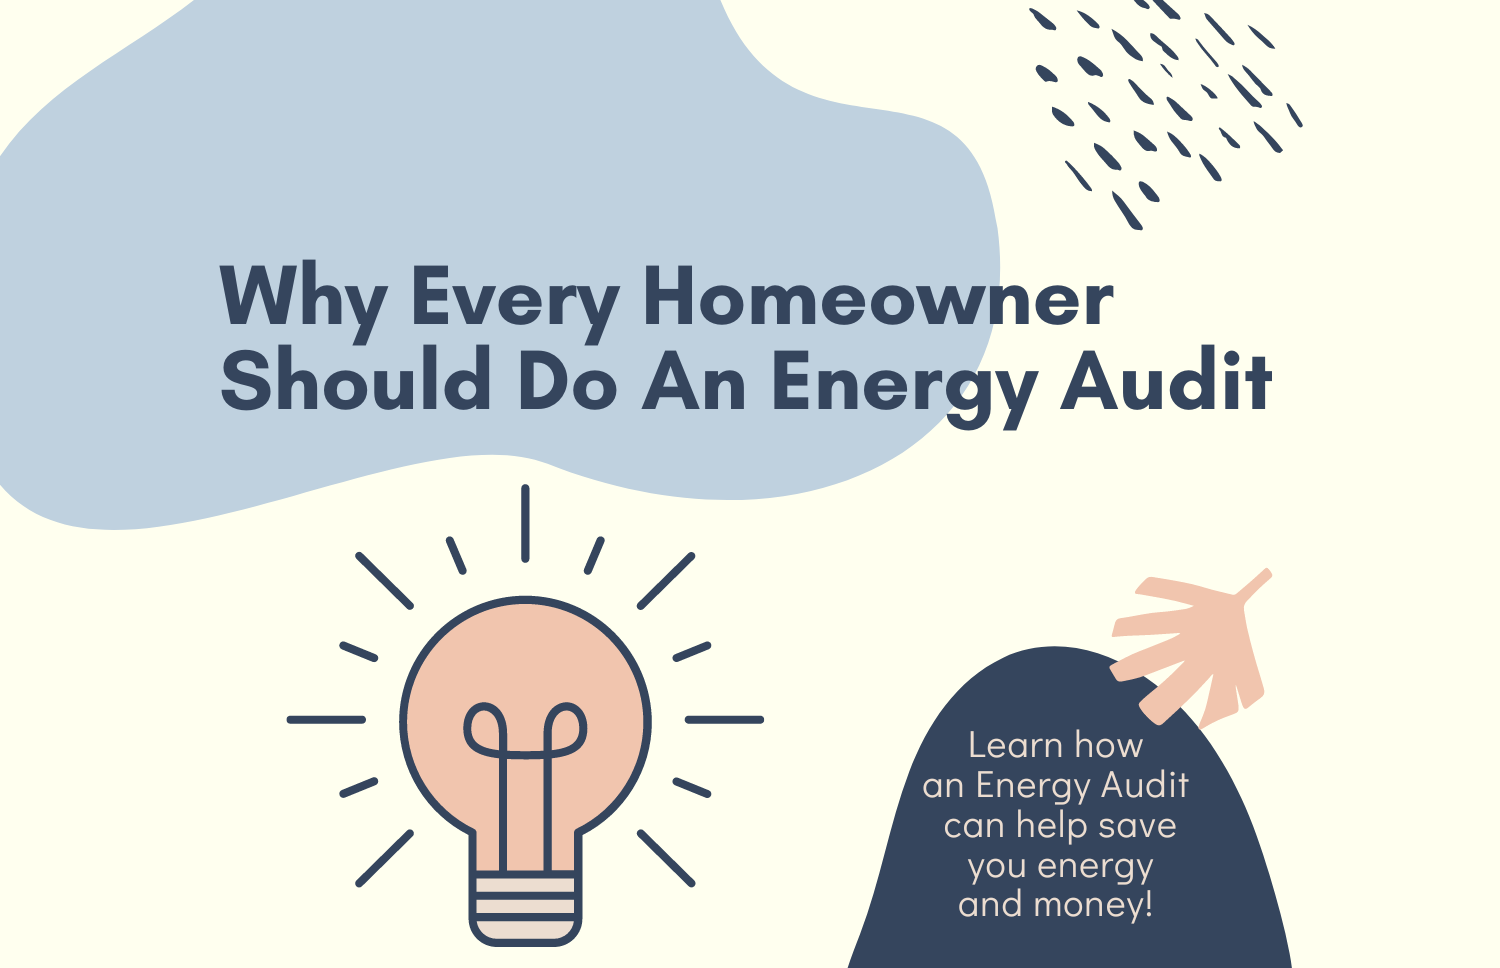 Why Every Homeowner Should Do An Energy Audit